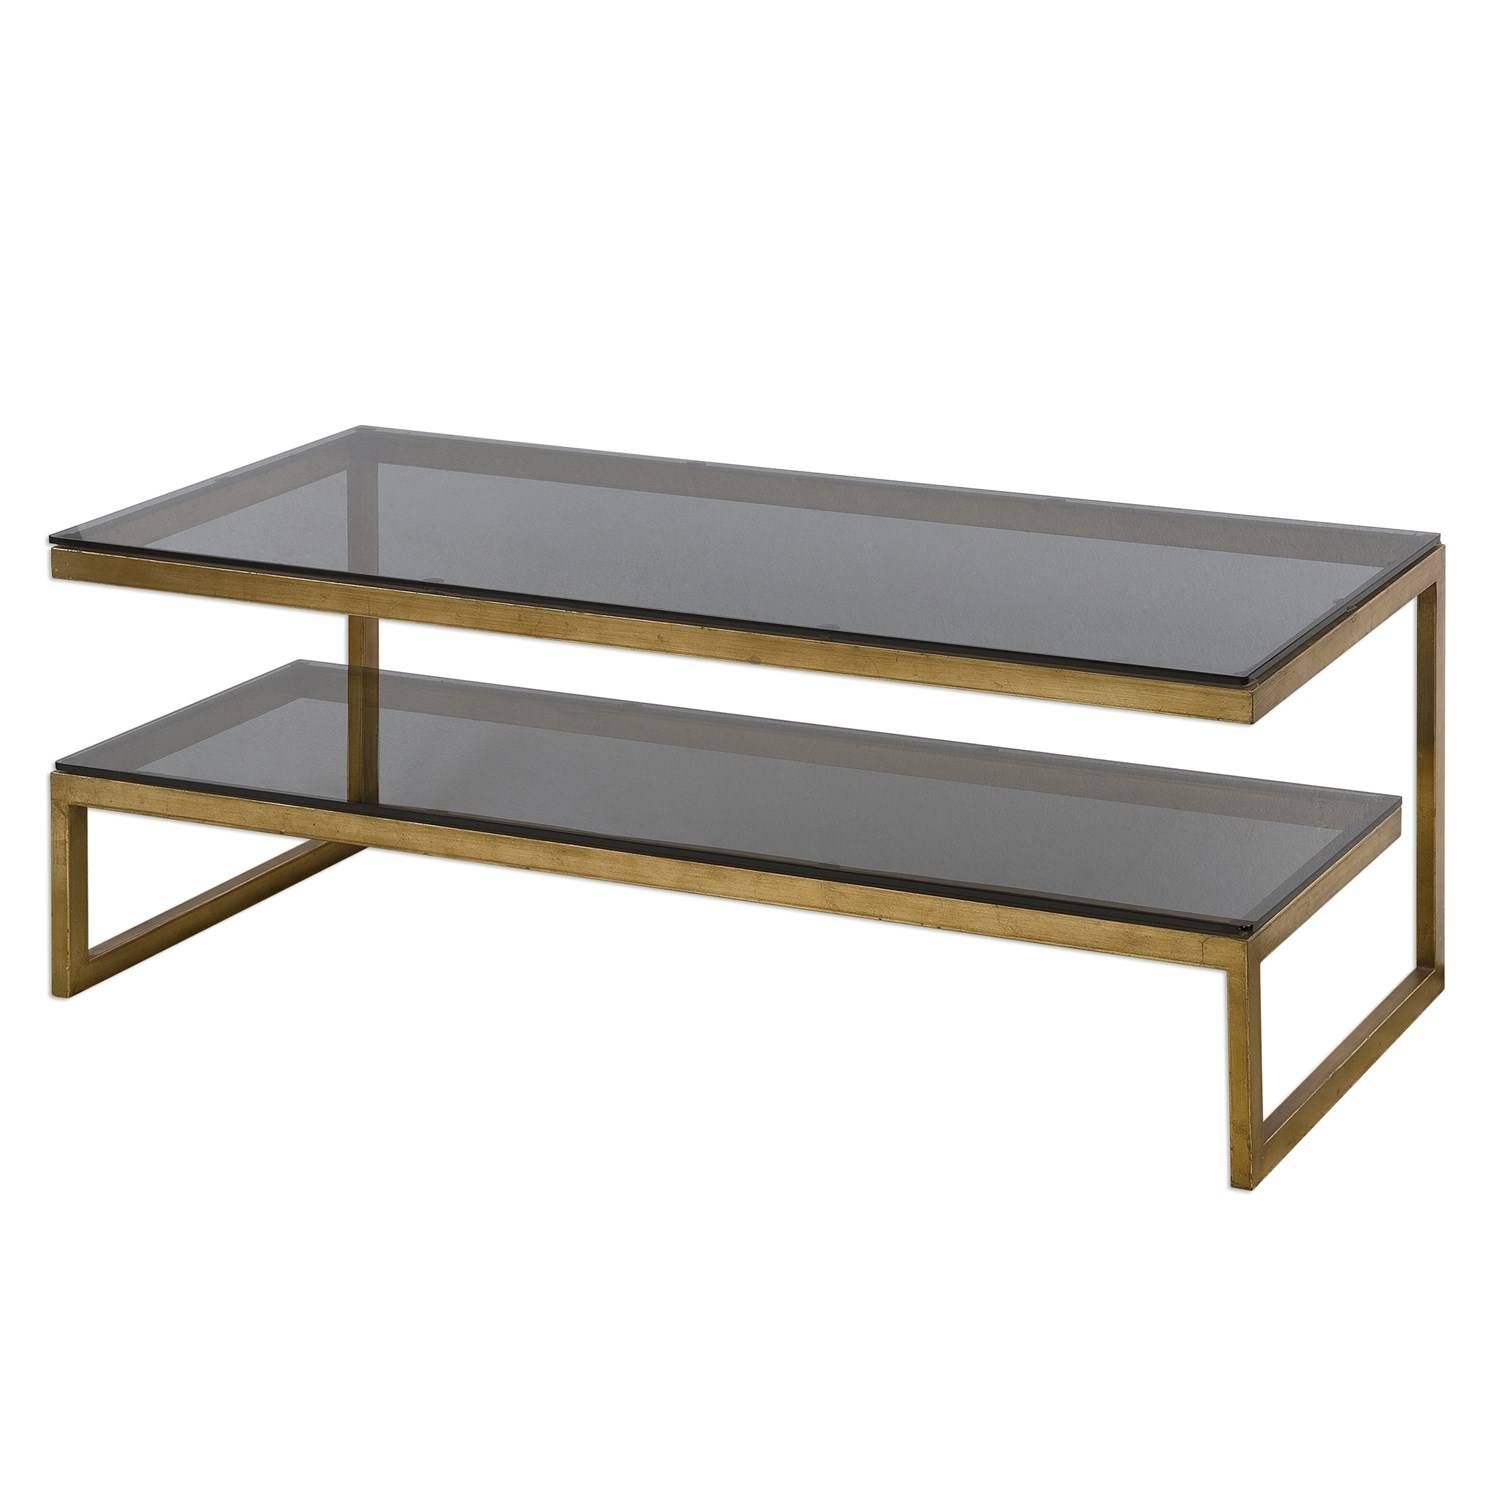 Uttermost 24619 Adeen Glass Coffee Table – Homeclick In Glass Coffee Tables With Shelf (View 25 of 30)